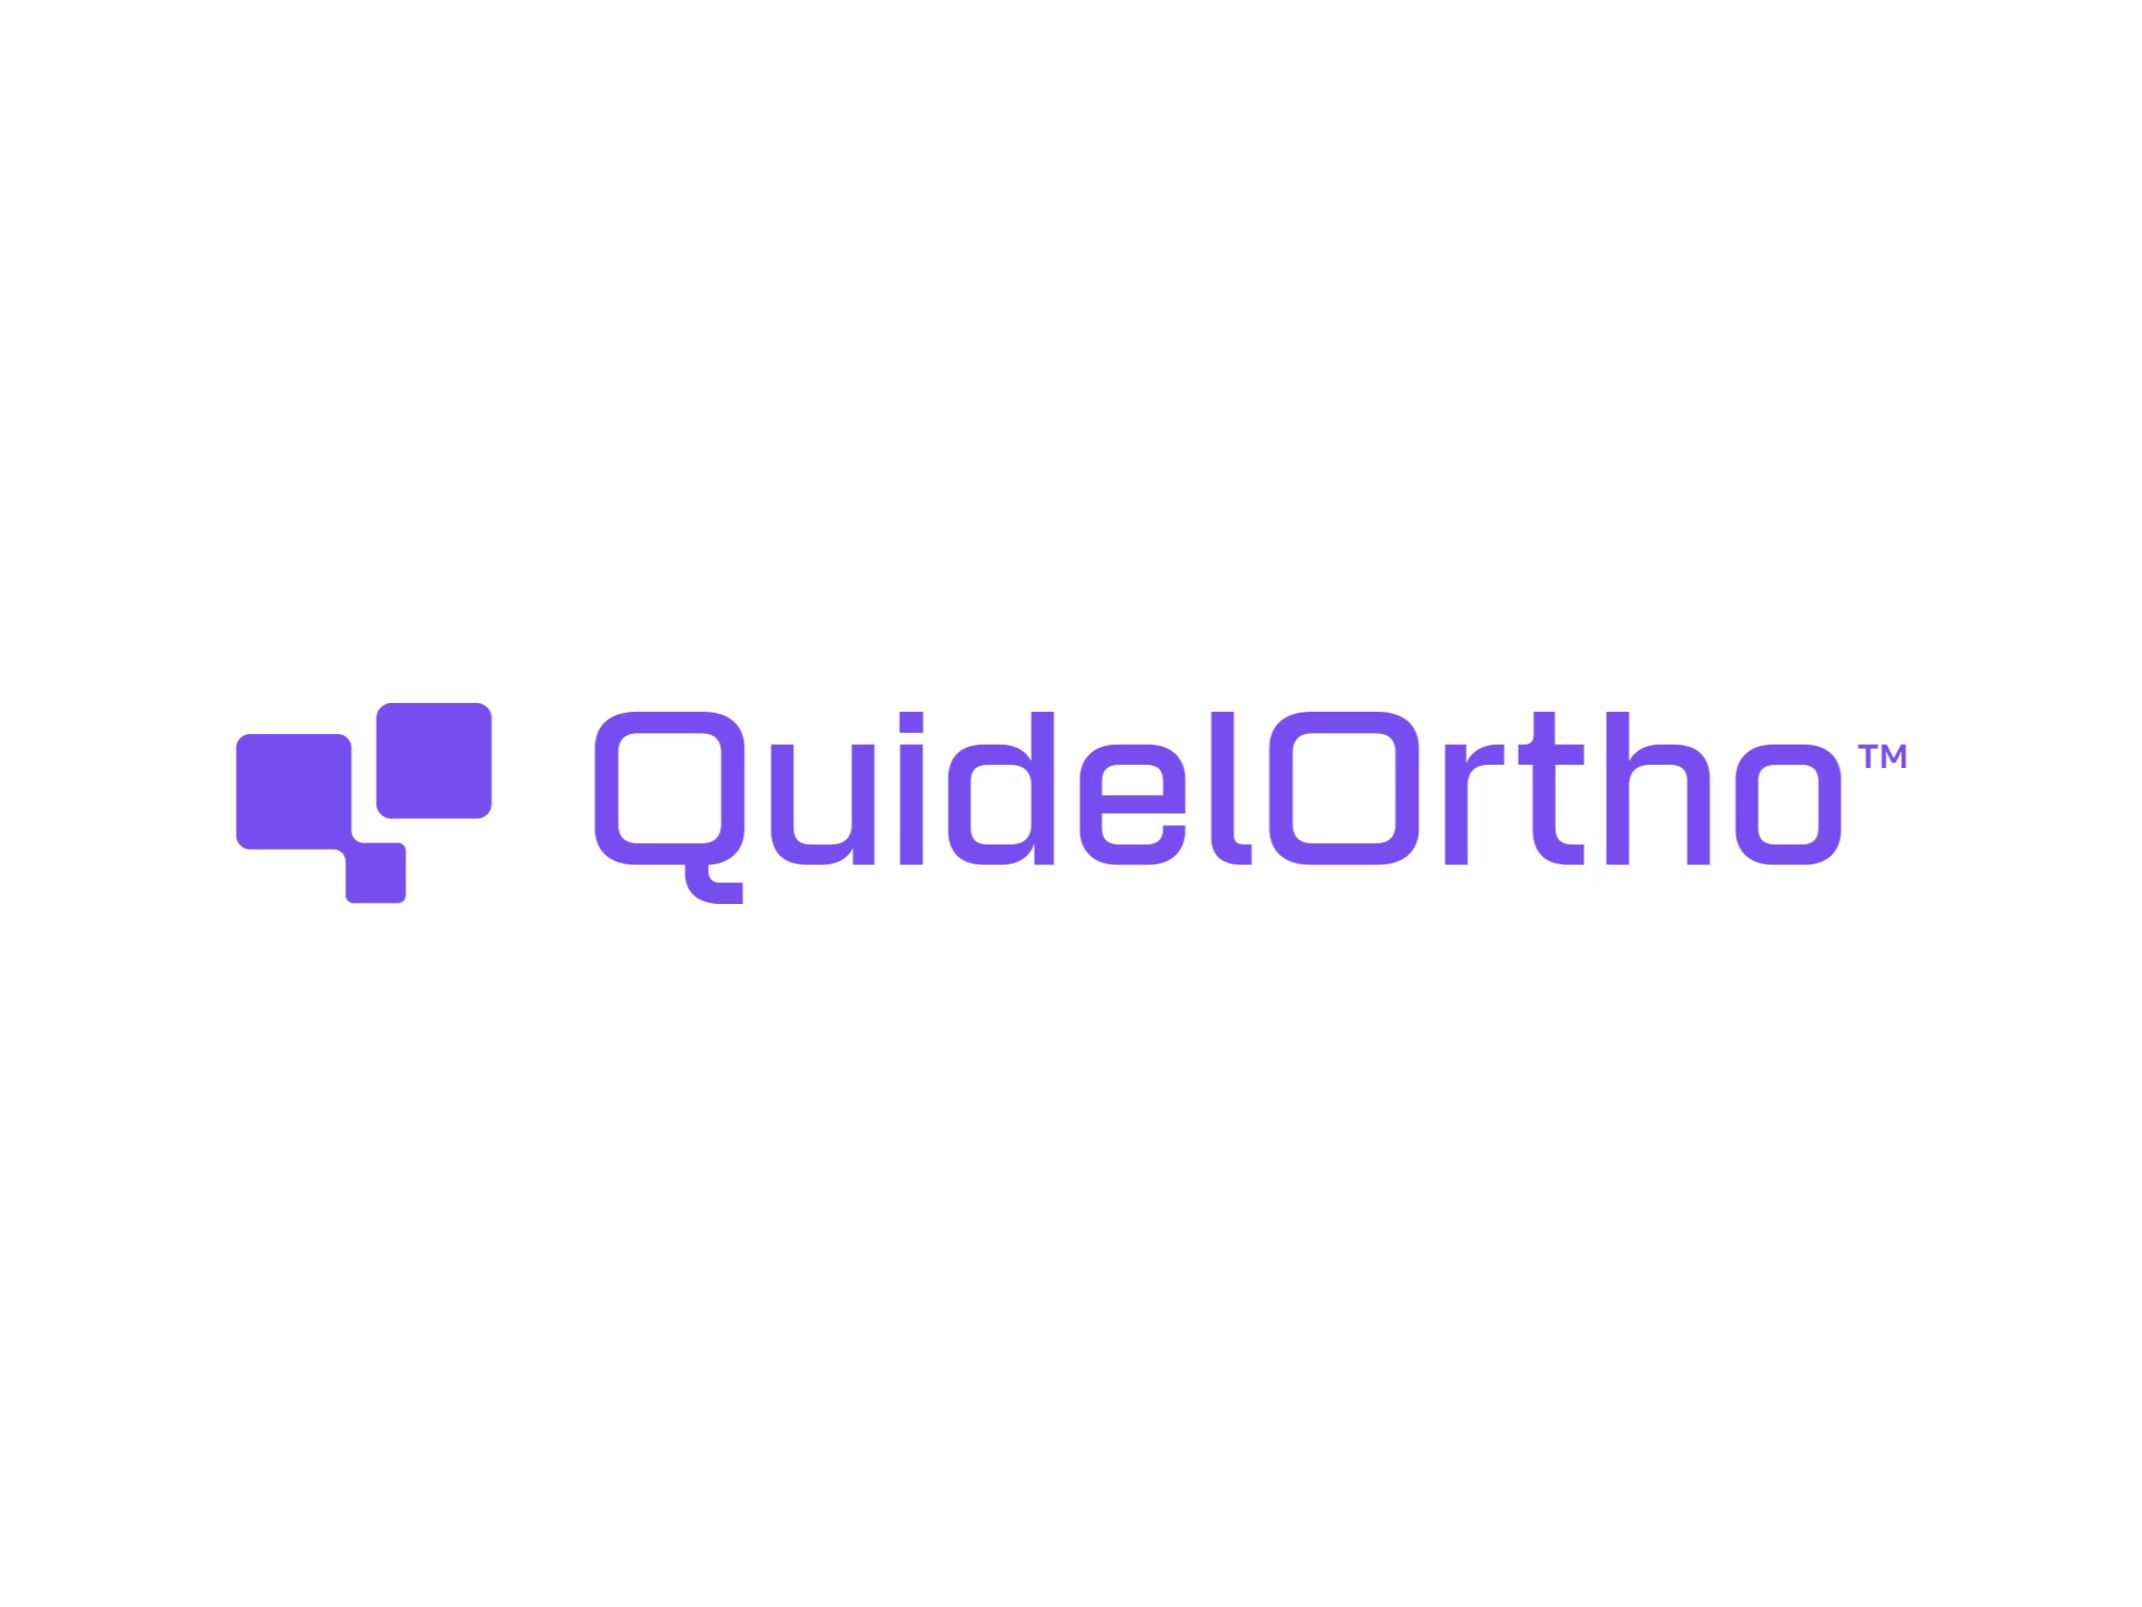 QuidelOrtho Gets Health Canada Approval for Triage Preeclampsia Test